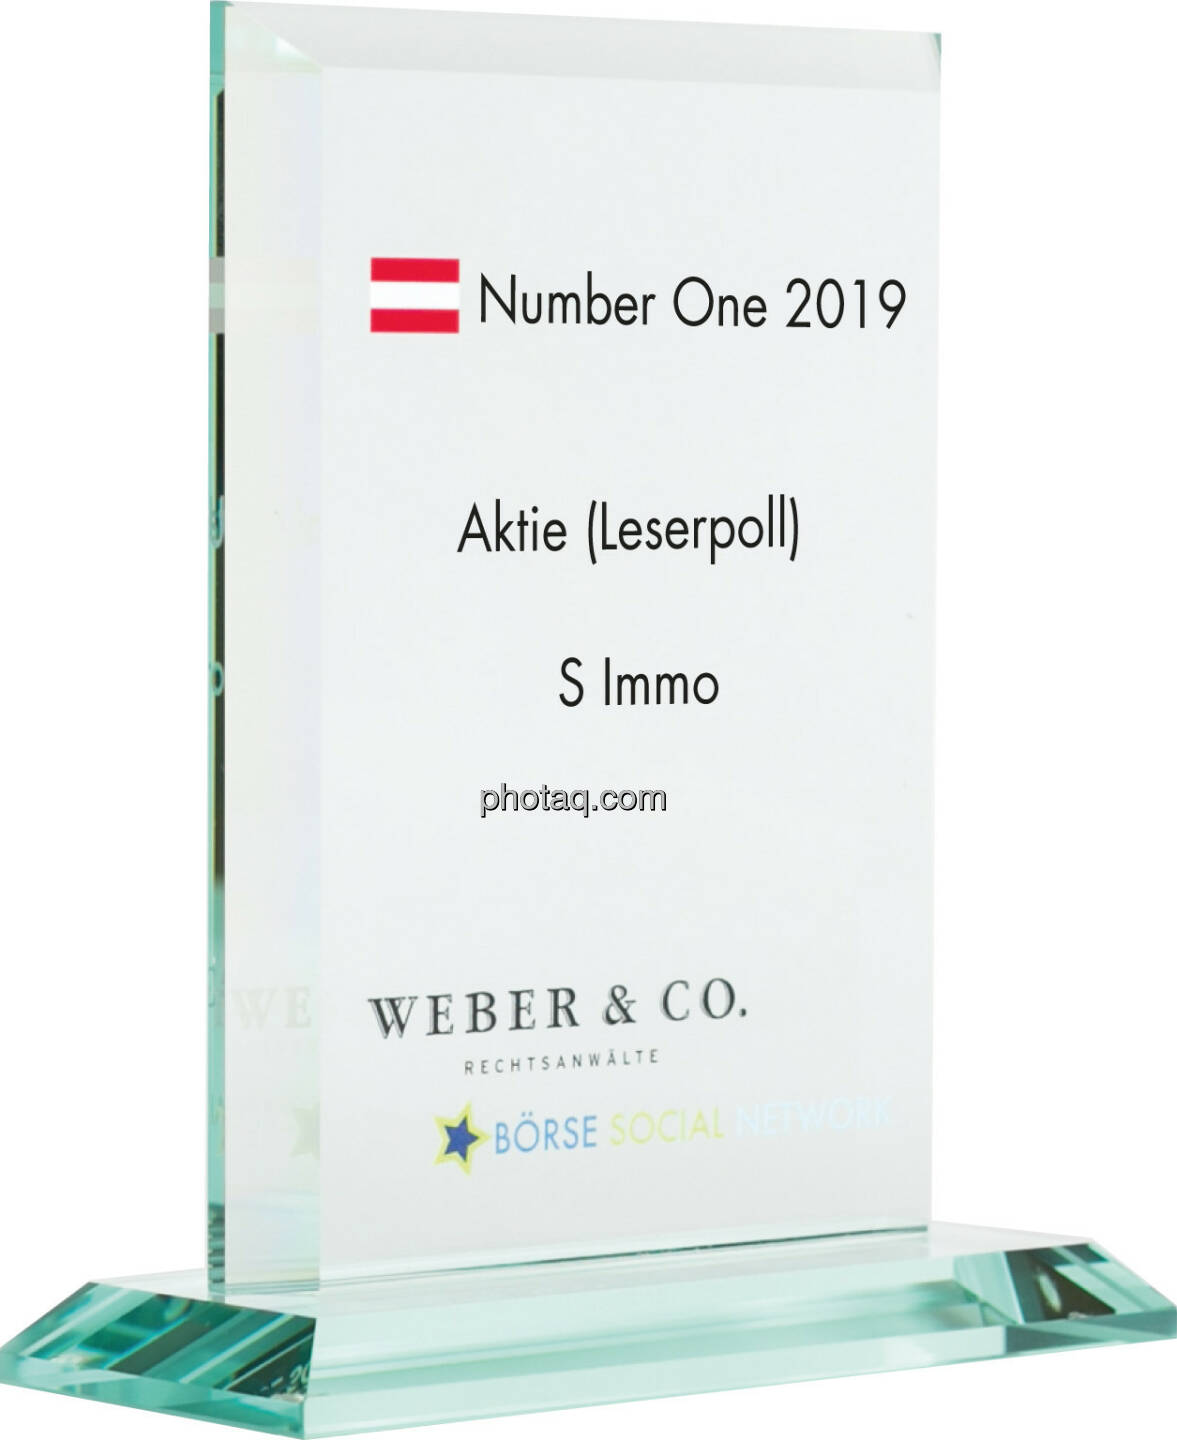 Number One Awards 2019 - Aktie (Leserpoll) S Immo